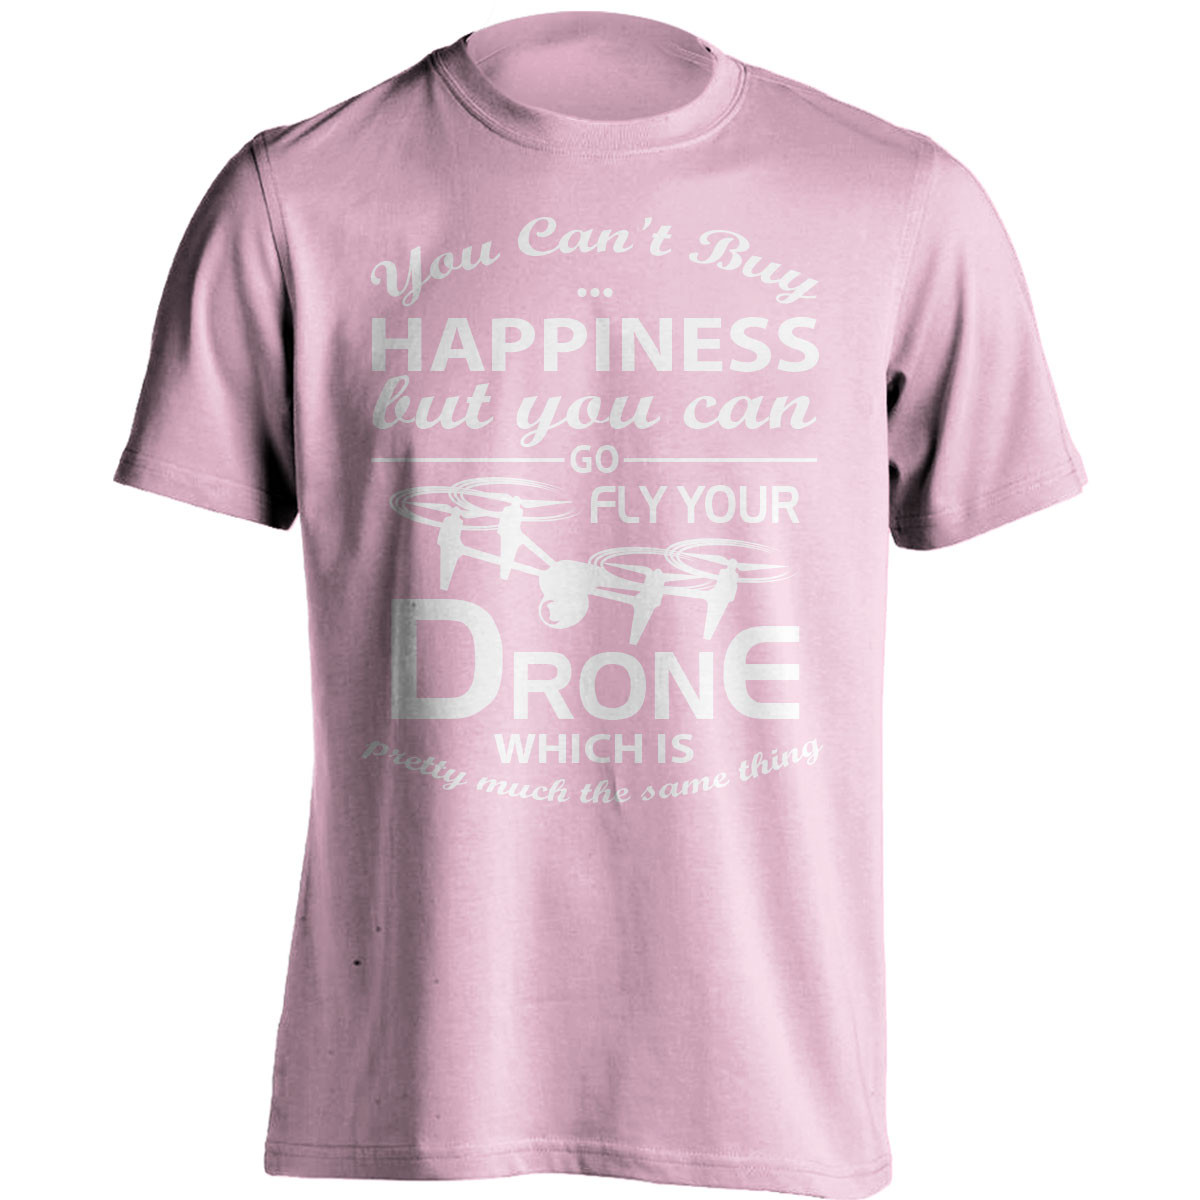 "You Can't Buy Happiness" Drone Flying T-Shirt